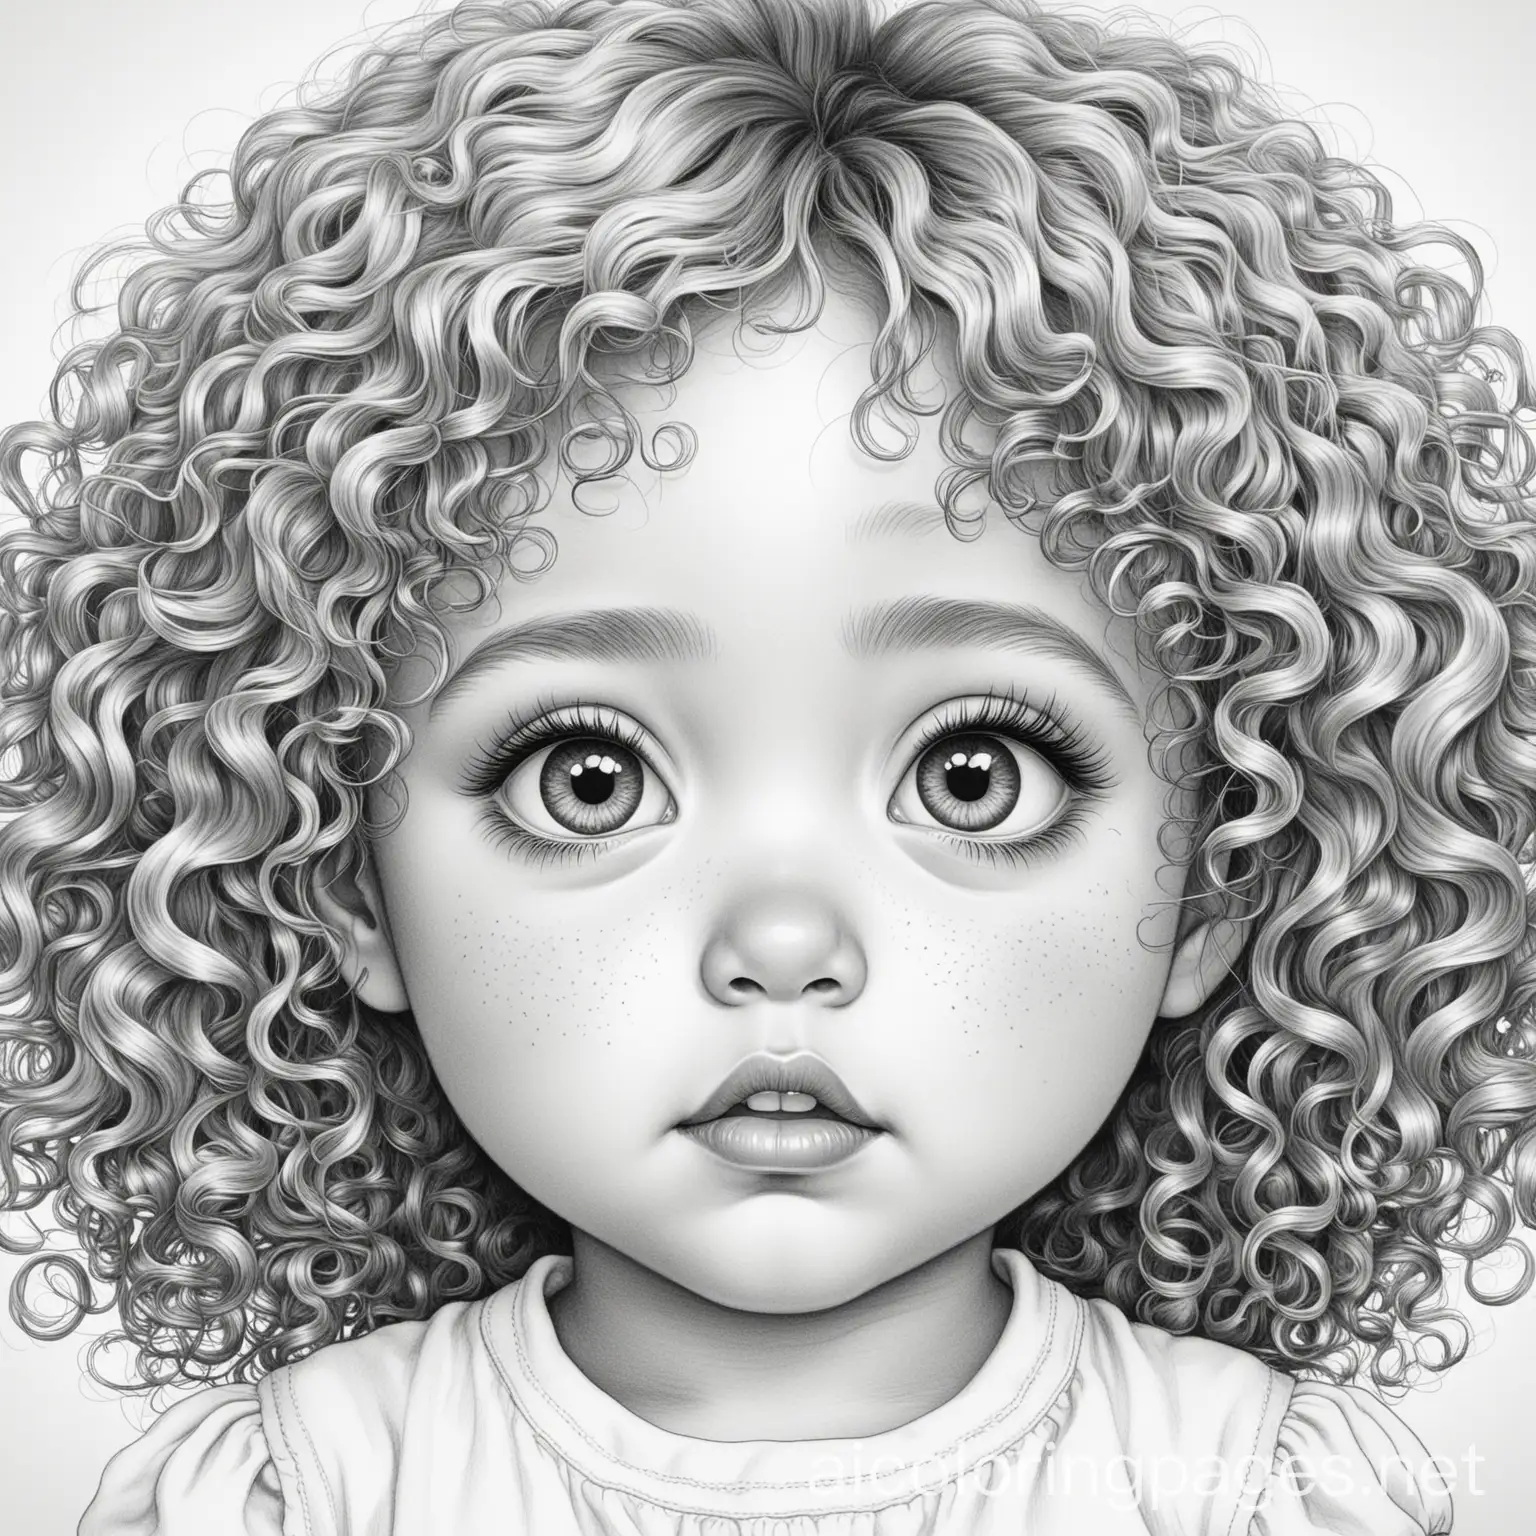 Adorable-Baby-Girl-Coloring-Page-CurlyHaired-Toddler-with-Big-Eyes-and-Chubby-Cheeks